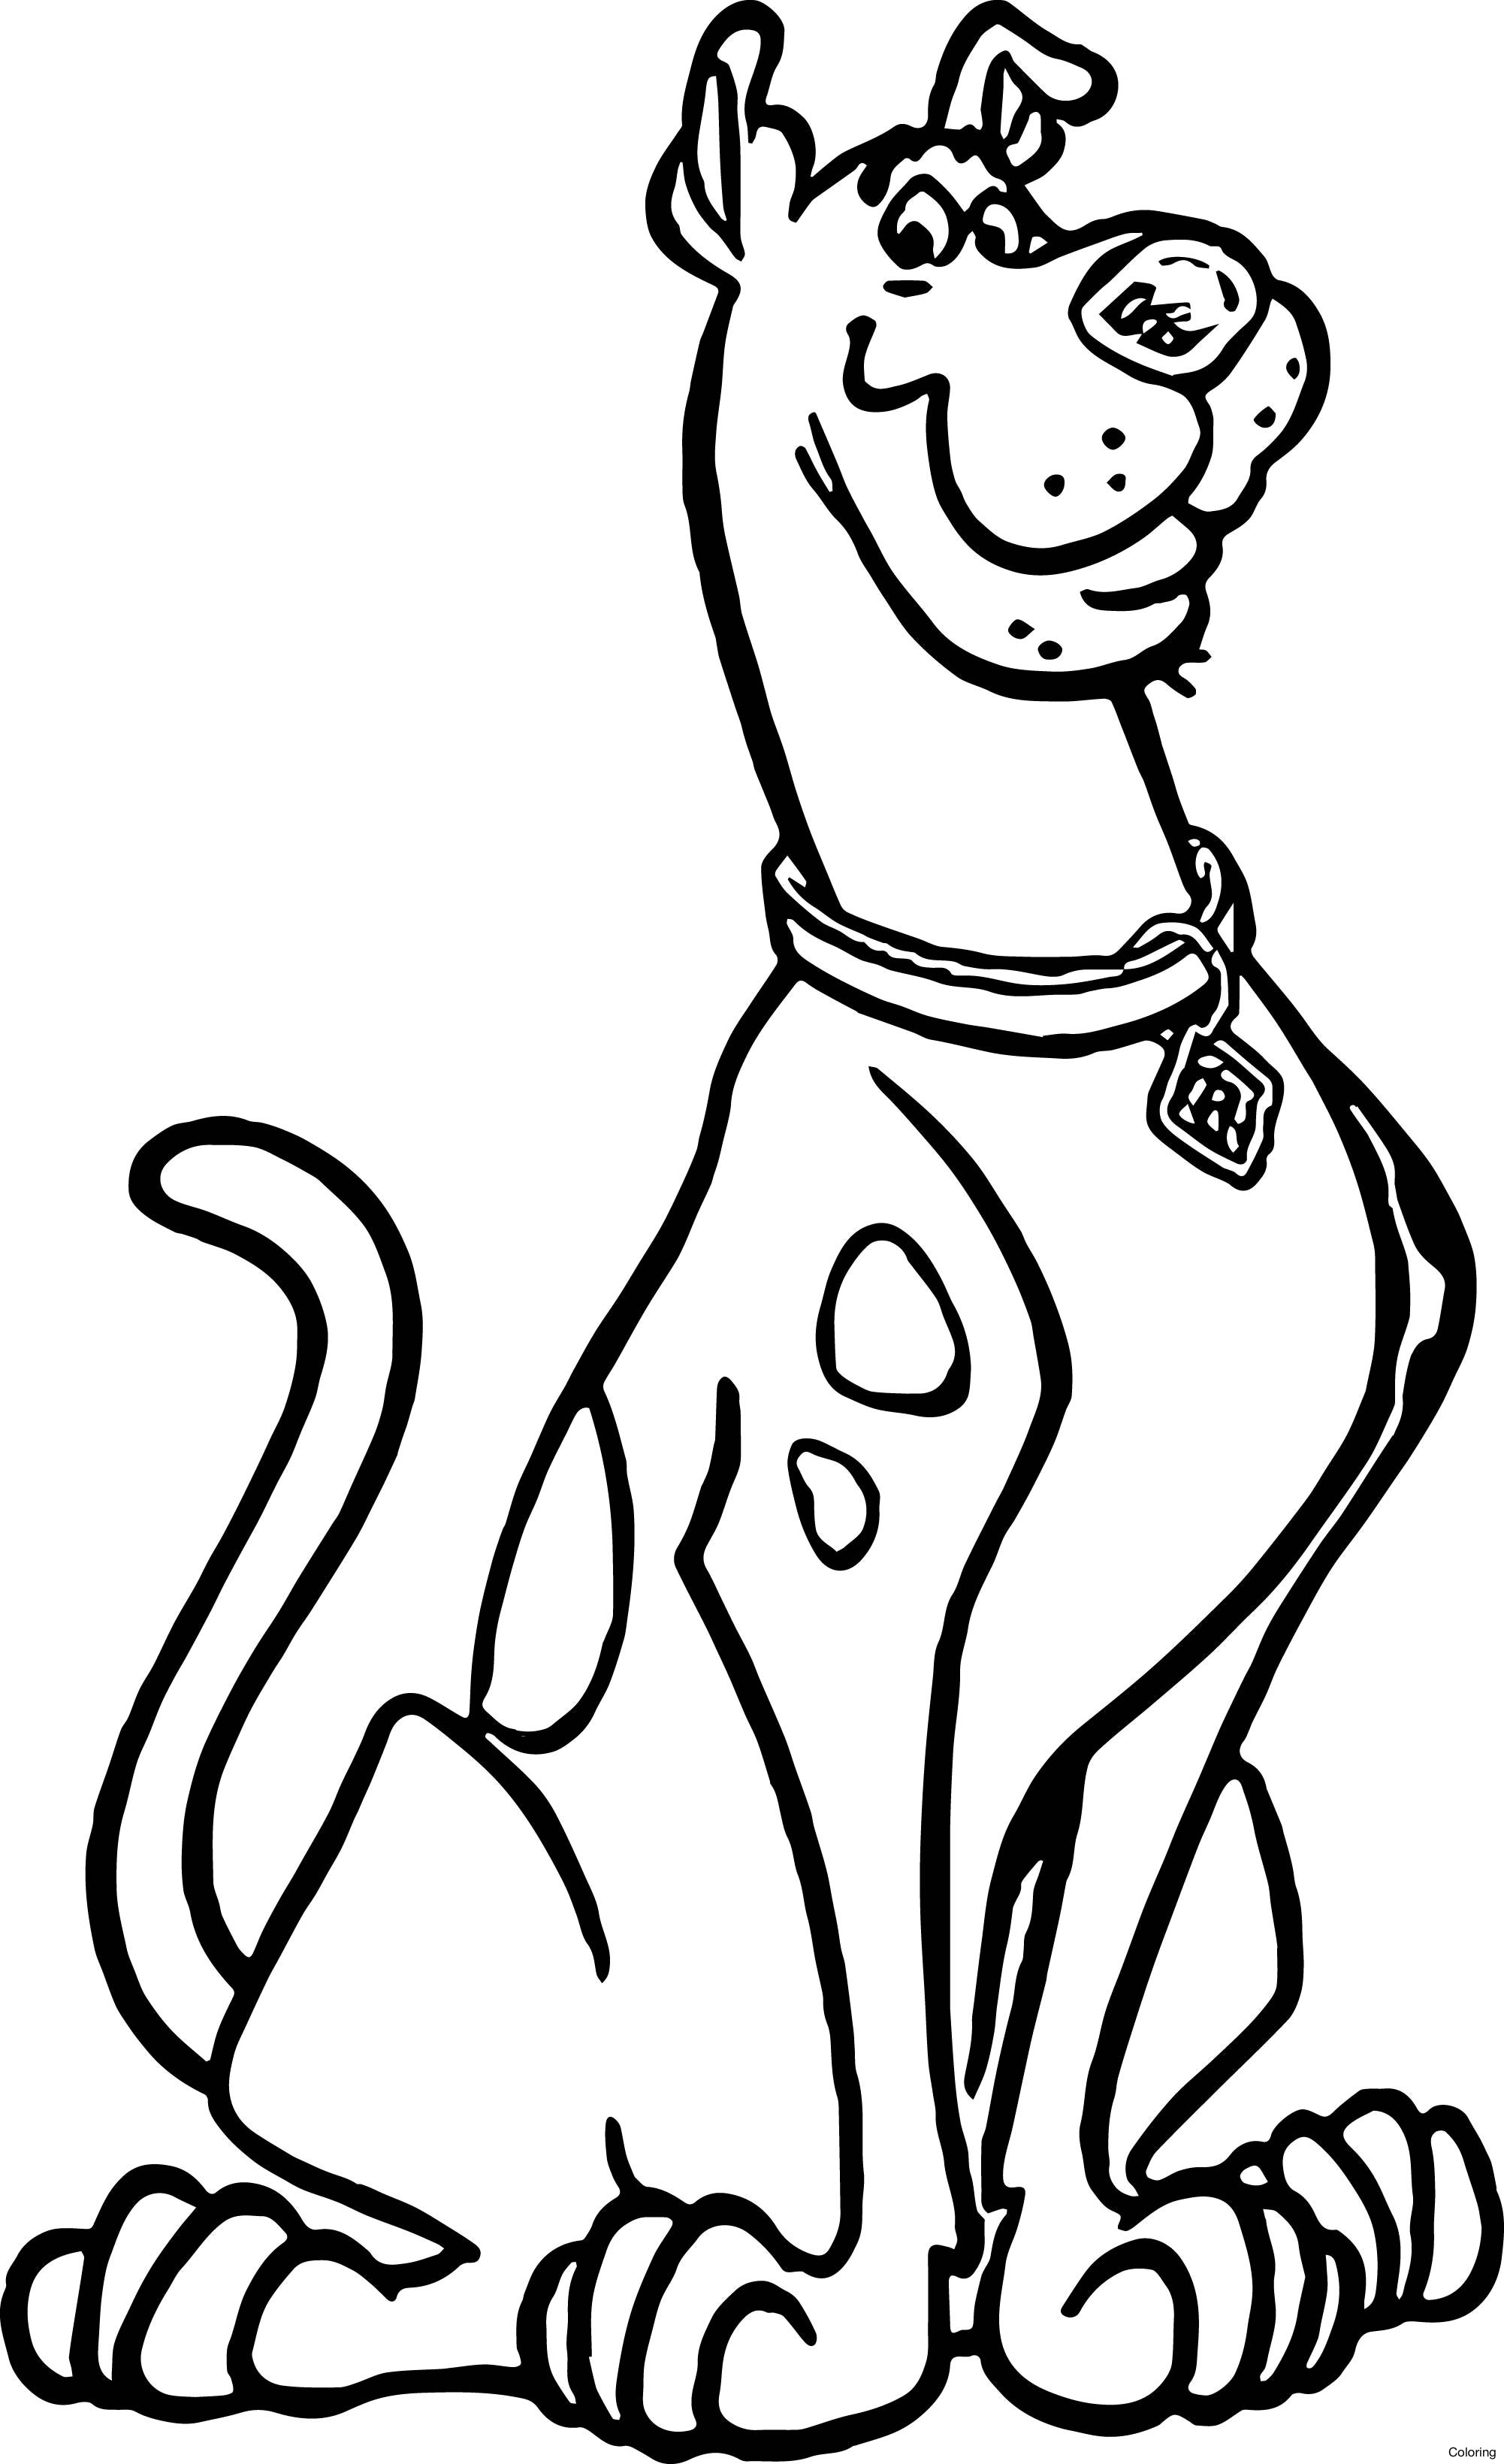 Coloring Pages For Boys Scooby Doo
 10 scooby doo coloring pages